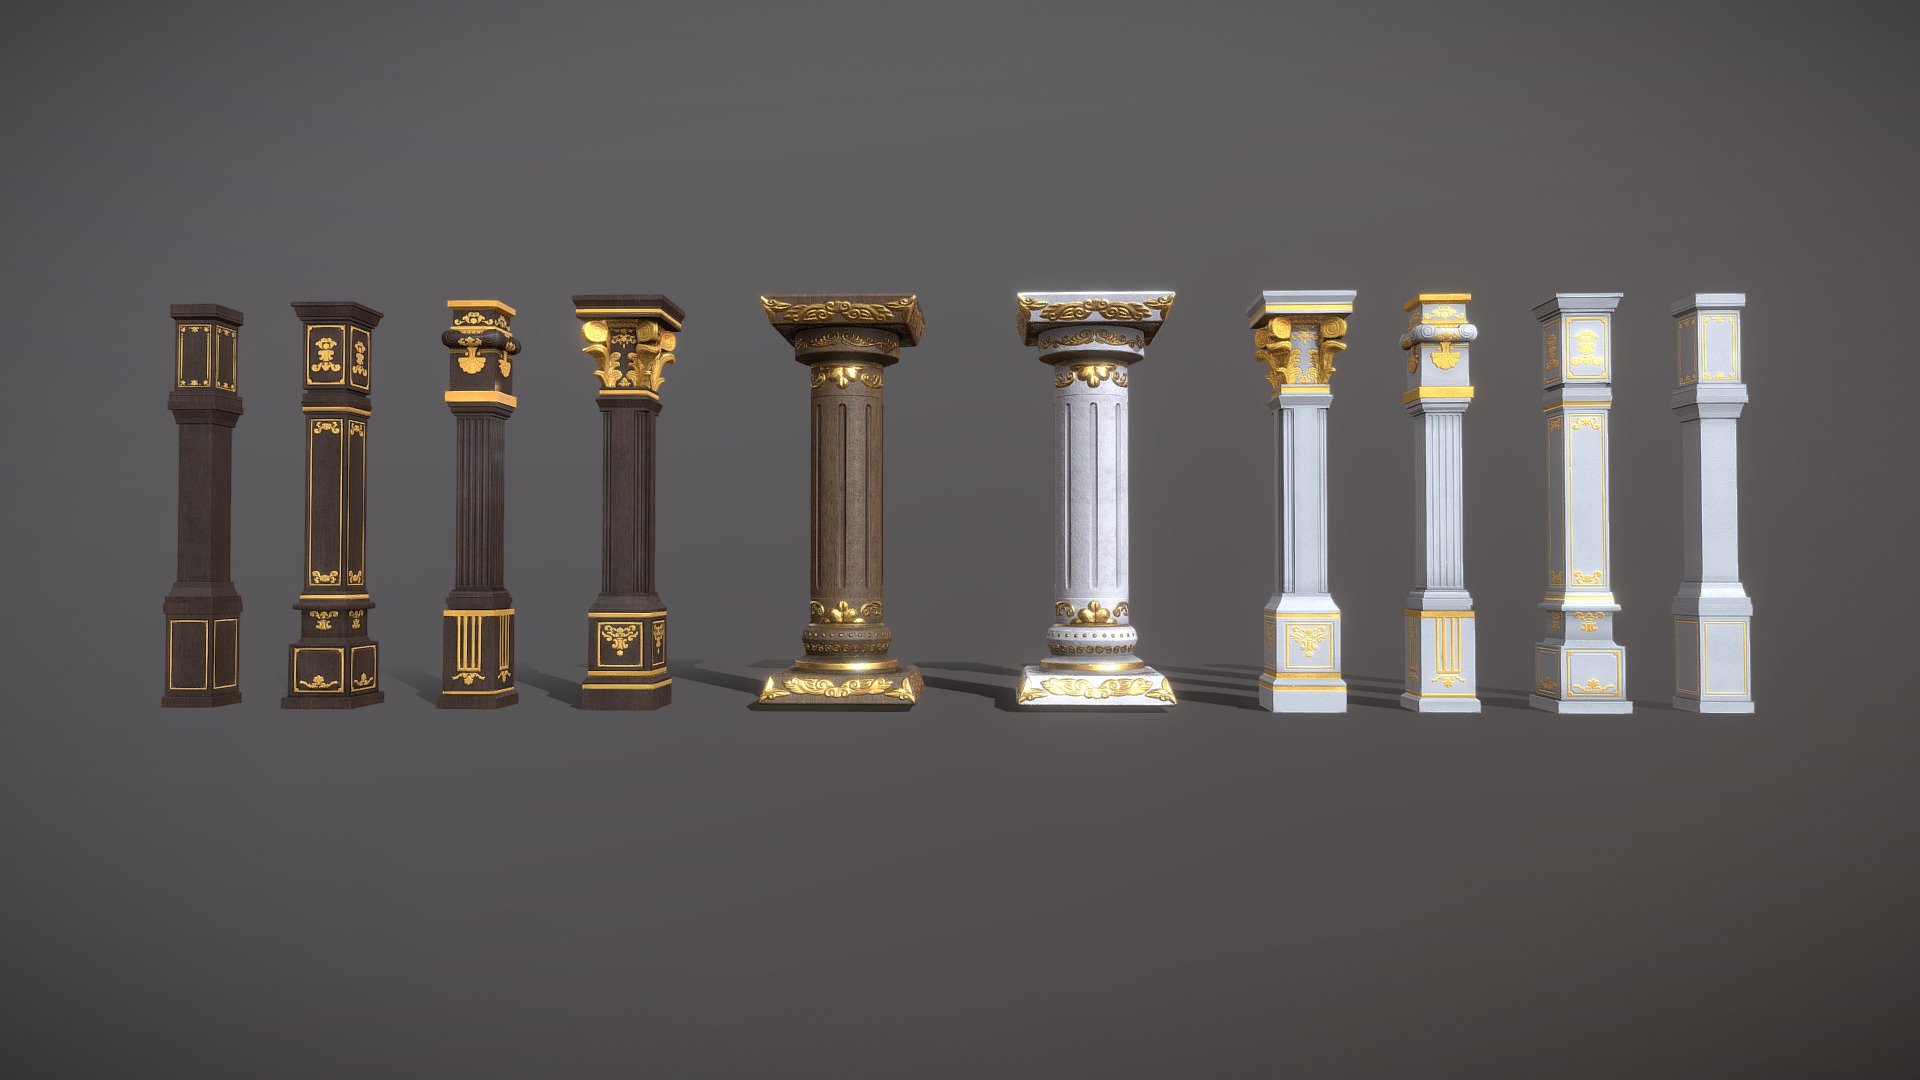 Classical style pillars can be assembled freely.
A variety of pillars can be combined arbitrarily. Pillar A has a set of animations, which can place object in the pillar, and pillars B to E are separate objects that can be assembled and stacked freely.

Minimum polygon count: 36 Tris
Maximum polygon count: 908 Tris
Texture format: png
Texture size: 2048x2048
Albedo, Base Color, AO, Normal, Specular

Animation count: 2
Animation type list:
Pillar_A
door open
door close - Classic Pillars Pack - Buy Royalty Free 3D model by Experience Lab Art (@Experience_Lab_Art) 3d model